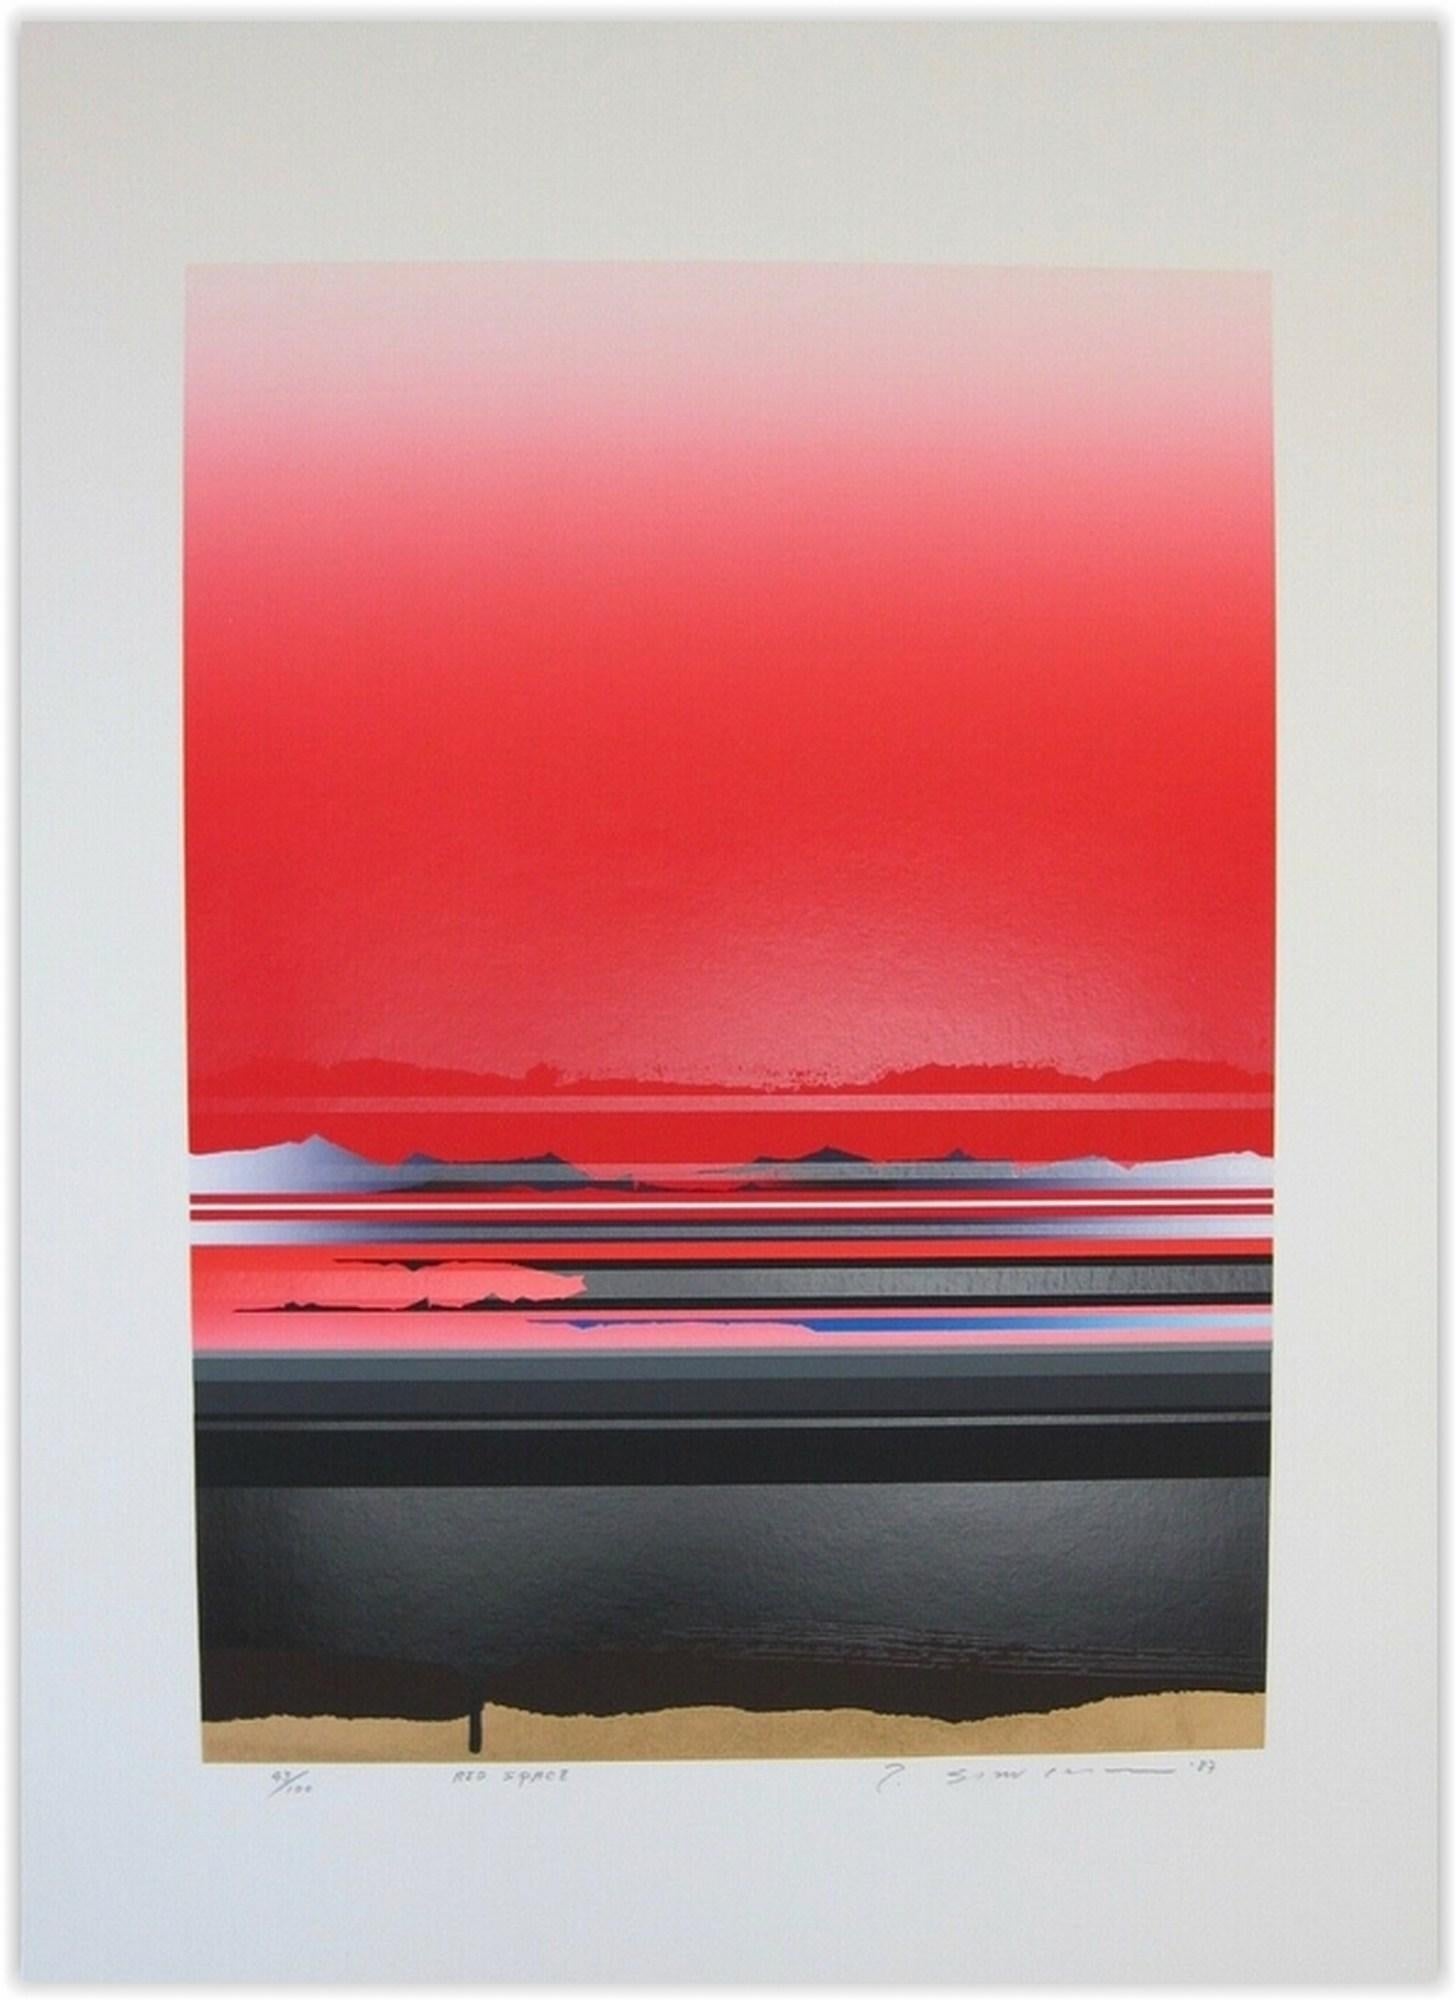 Red Space - Print by Tetsuro Sawada